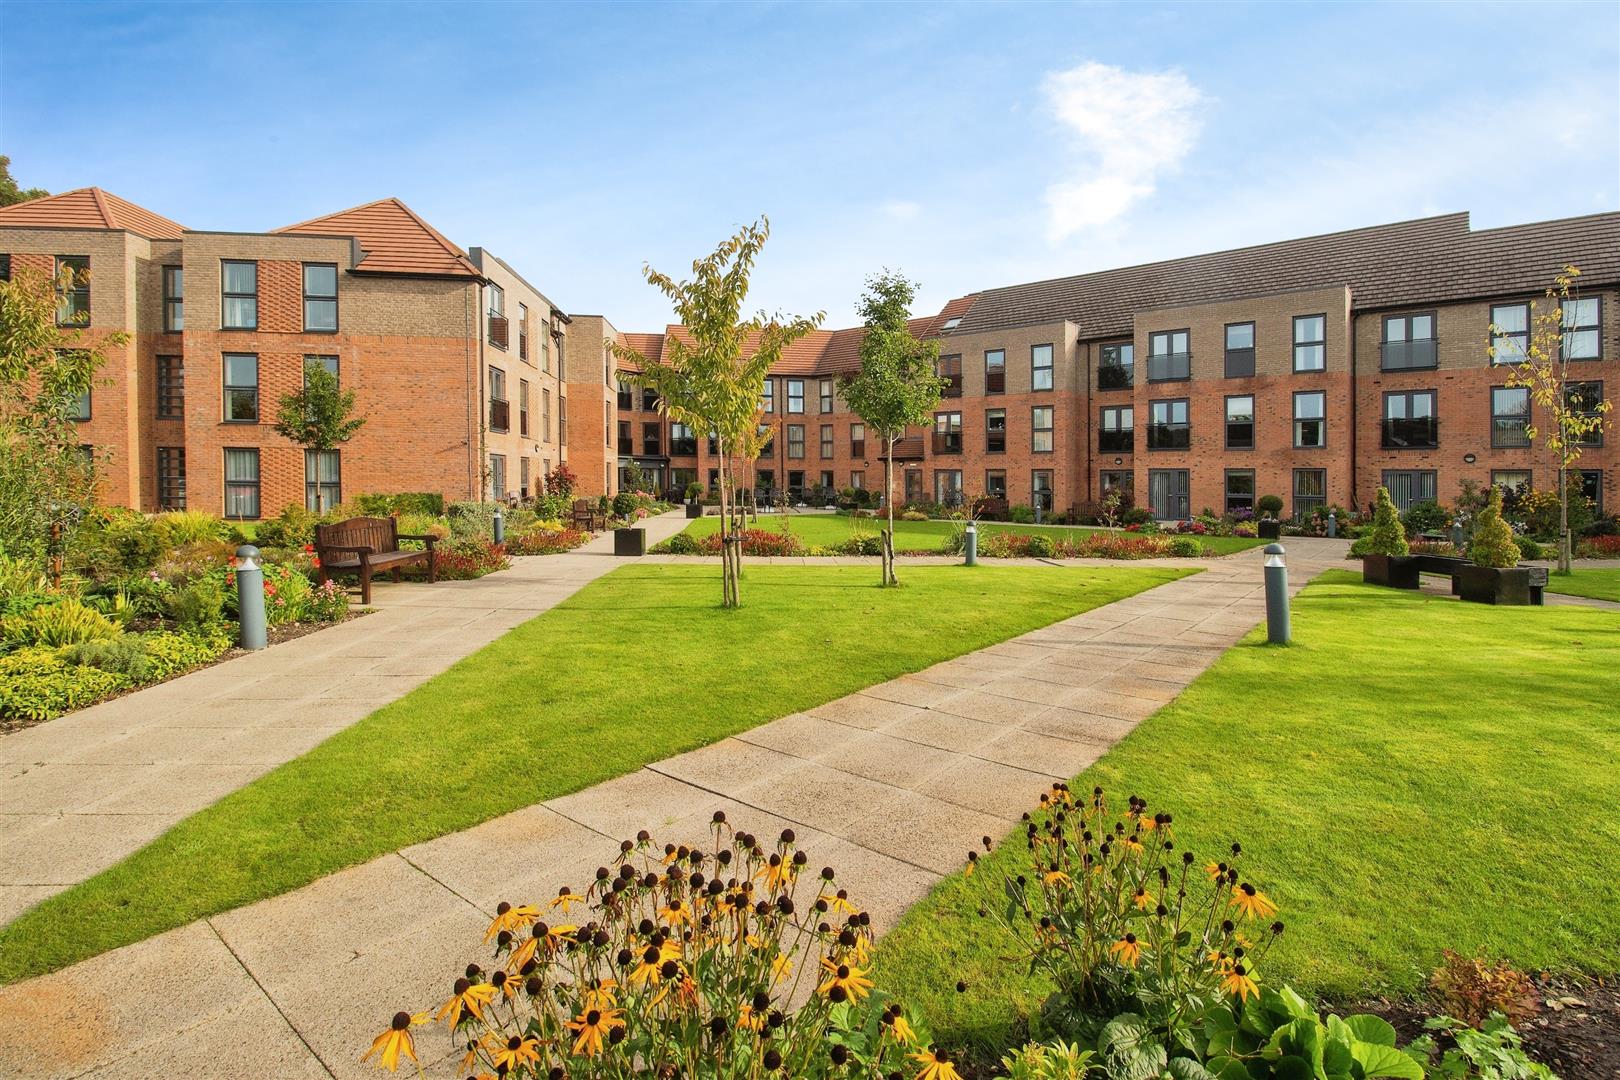 Deans Park Court, Kingsway, Stafford, Staffordshire, ST16 1GD